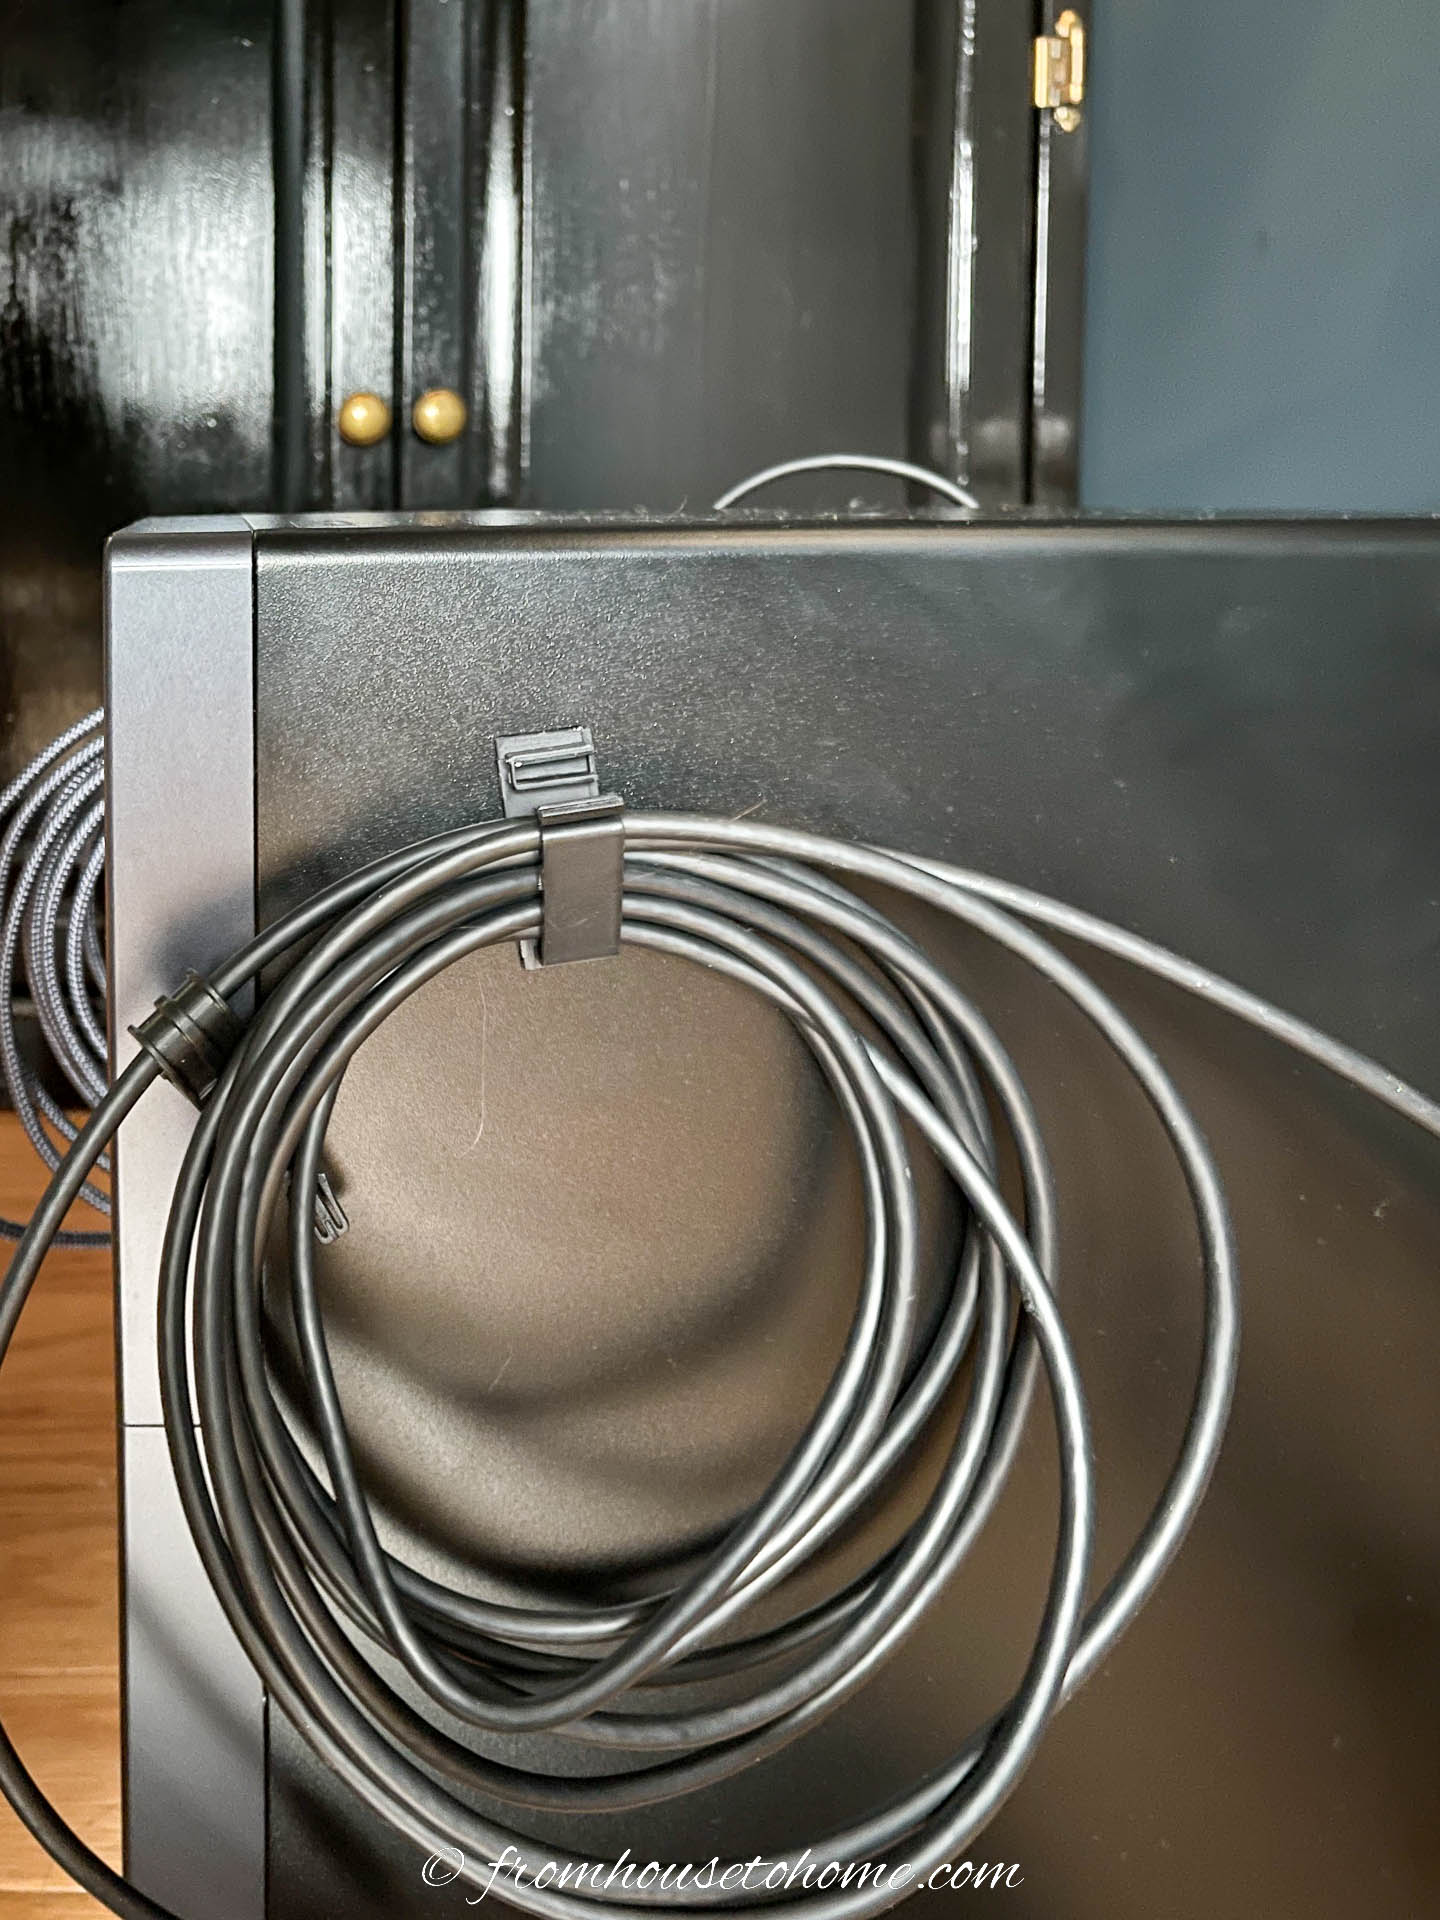 An adhesive computer clip holding a coil of wire attached to the side of a PC